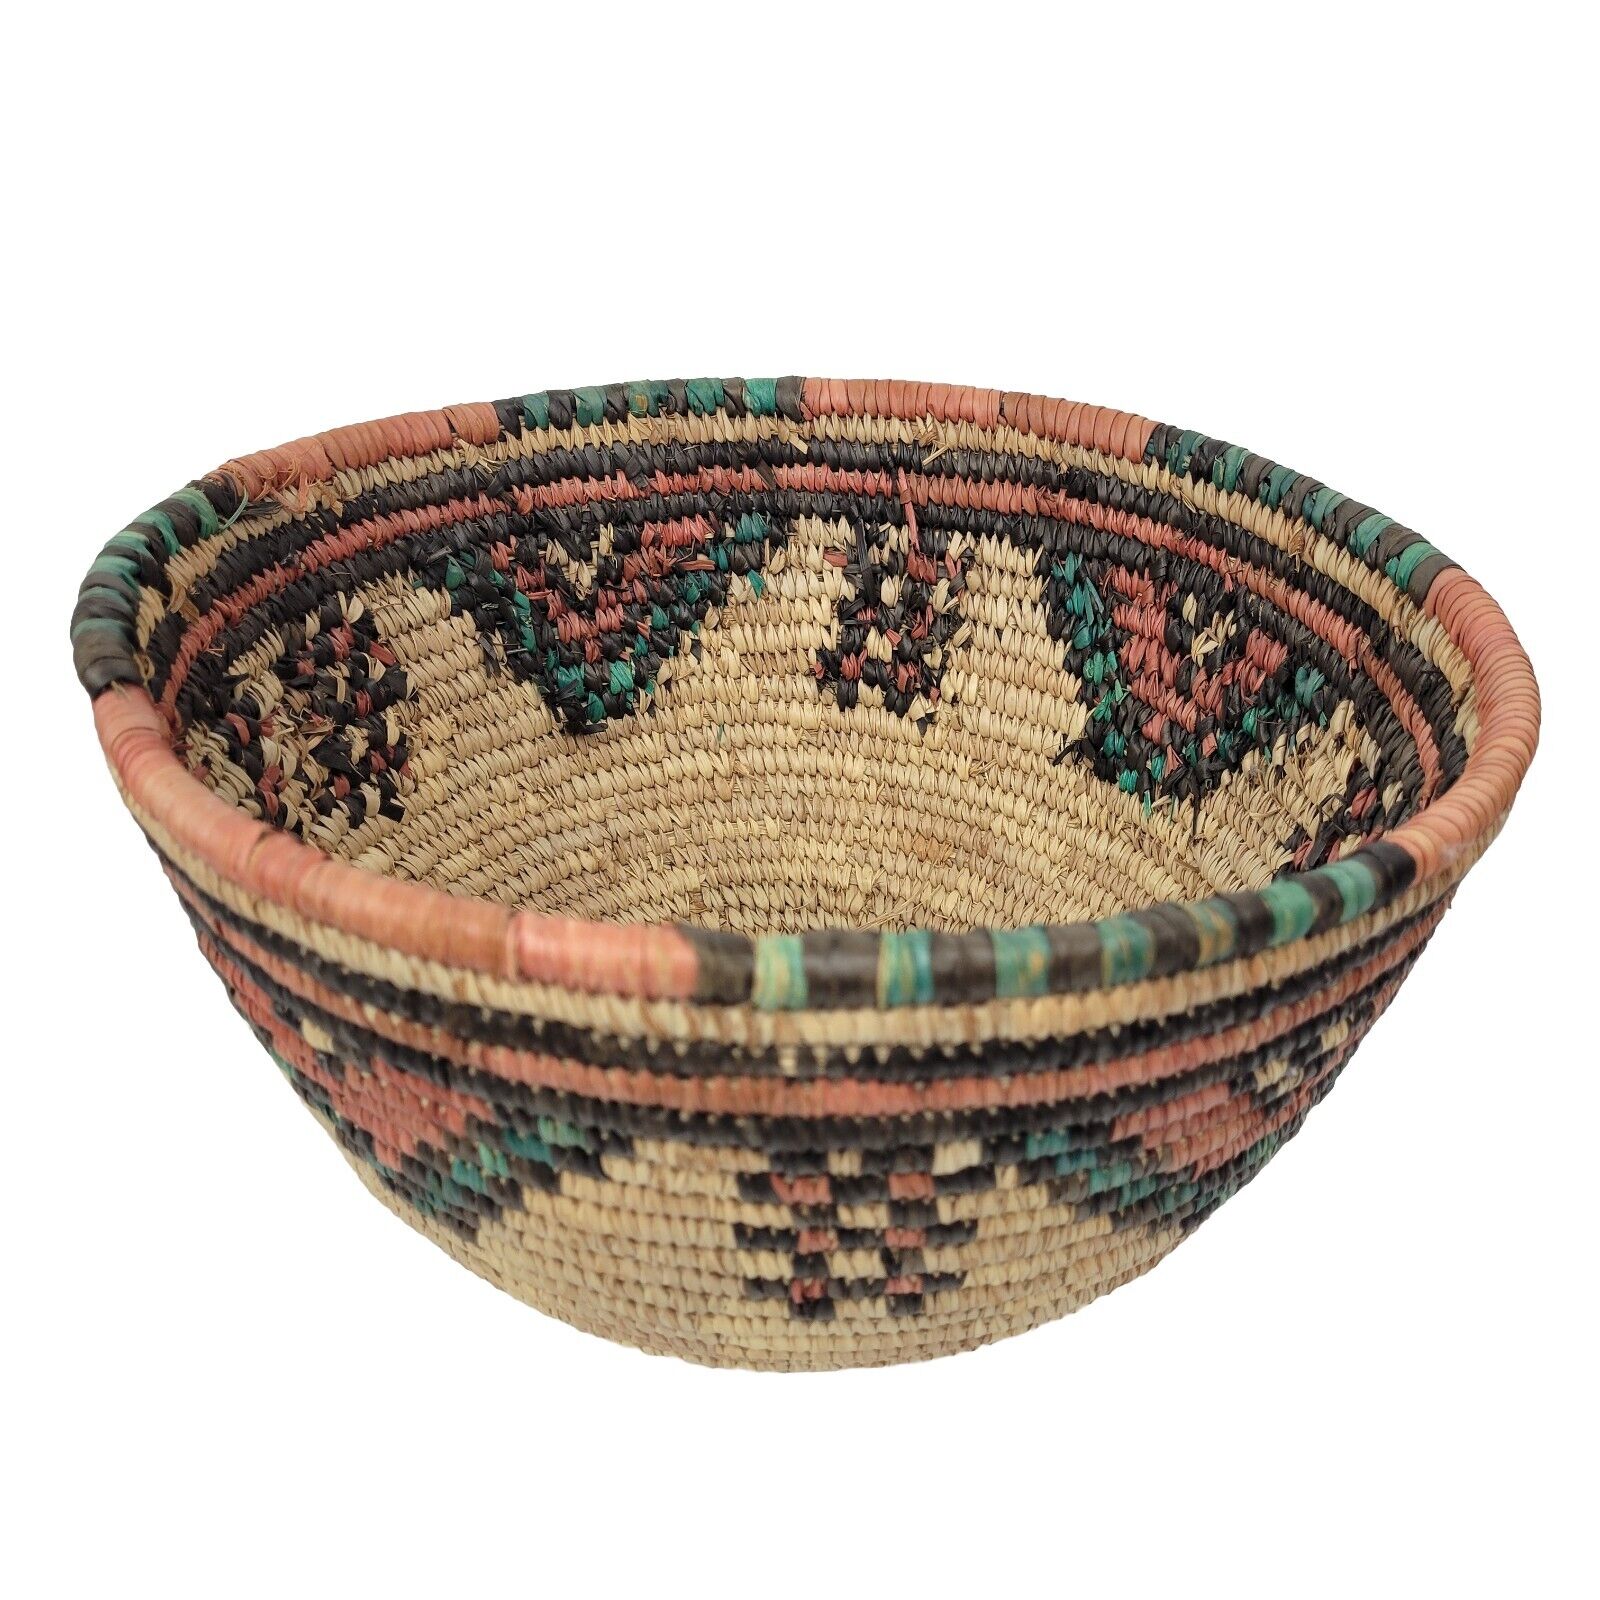 Nigerian Hausa Woven Coiled Grass Bowl Basket Africa Red~Teal Green~Brown~11